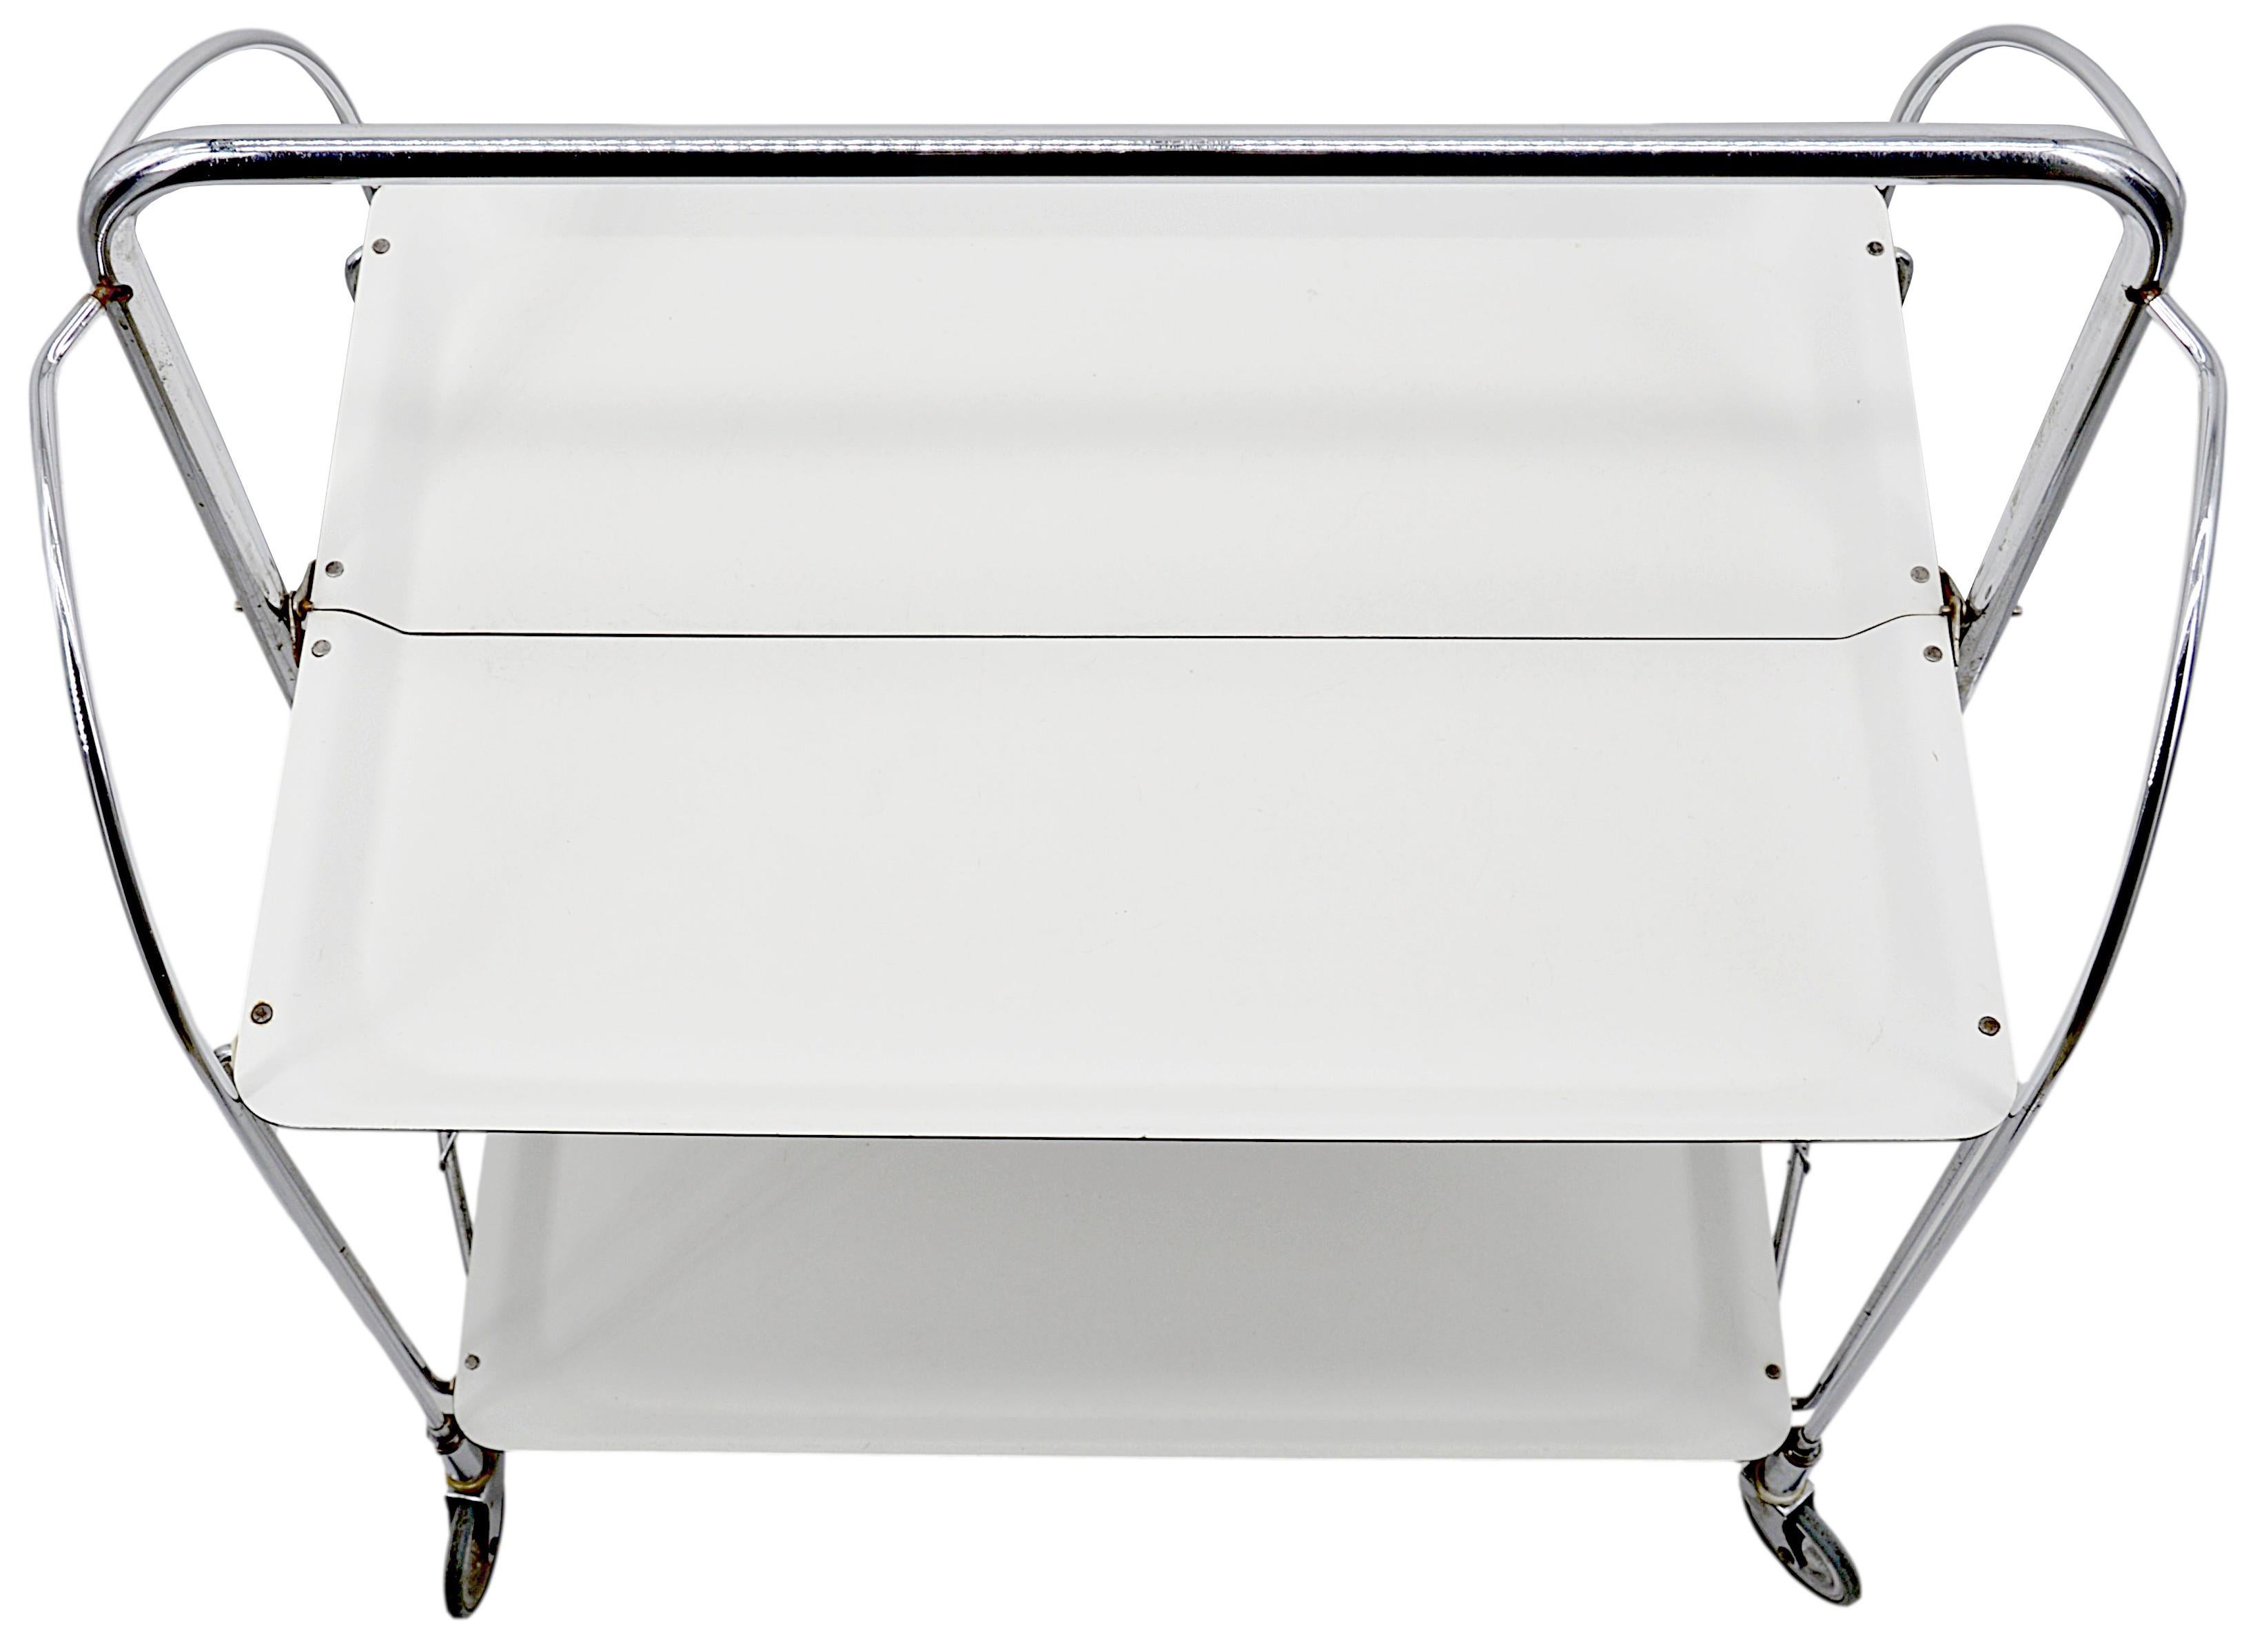 Midcentury serving trolley table, Germany, 1960s. Folding table. Chrome, metal and plastic. Measures: Height 30.3